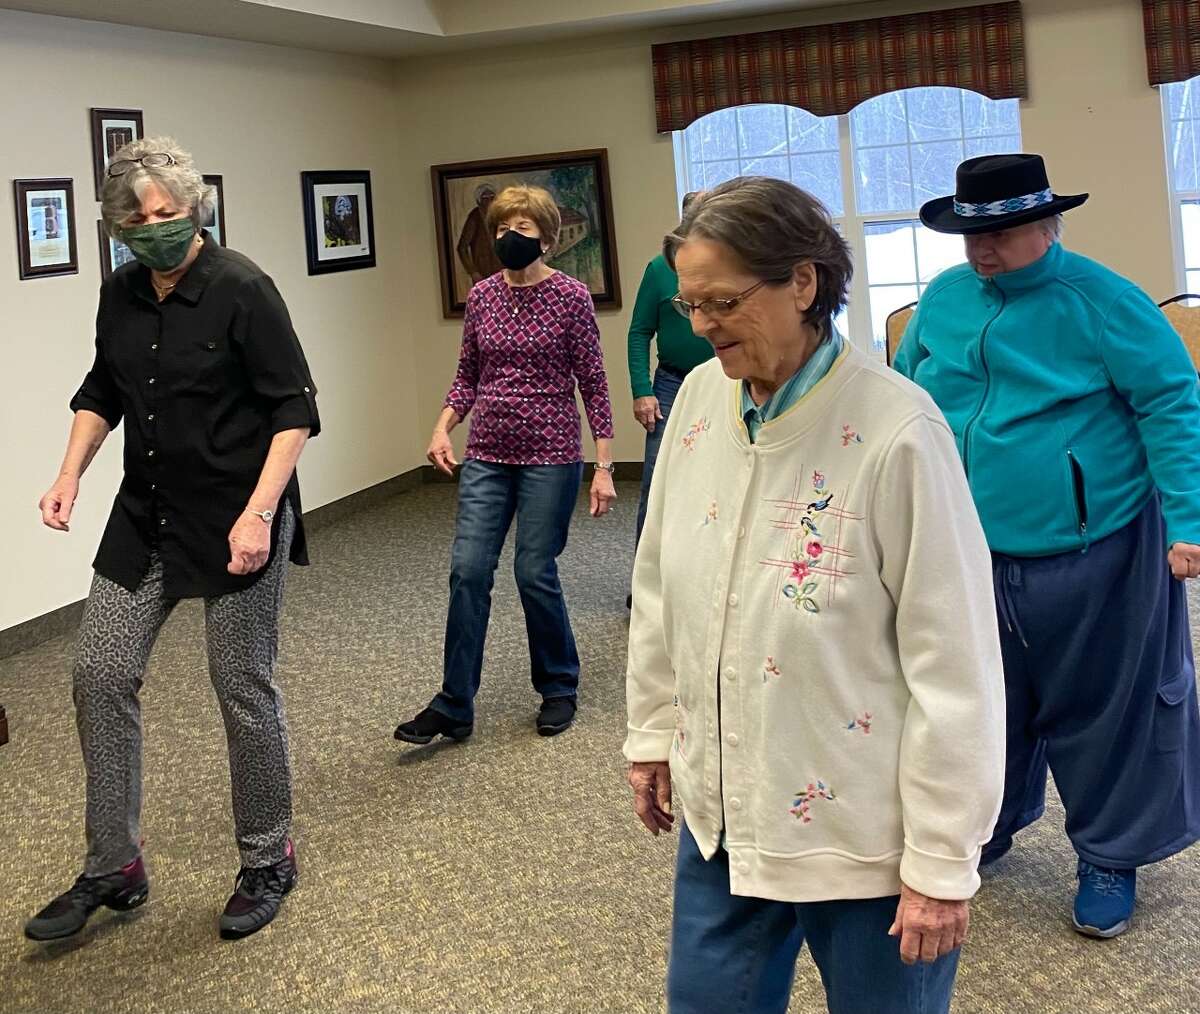 Residents at Candlestone Assisted Living recently got a line dancing lesson from Greater Midland Community Center instructor Linda Graf, who is at the far left in this picture.